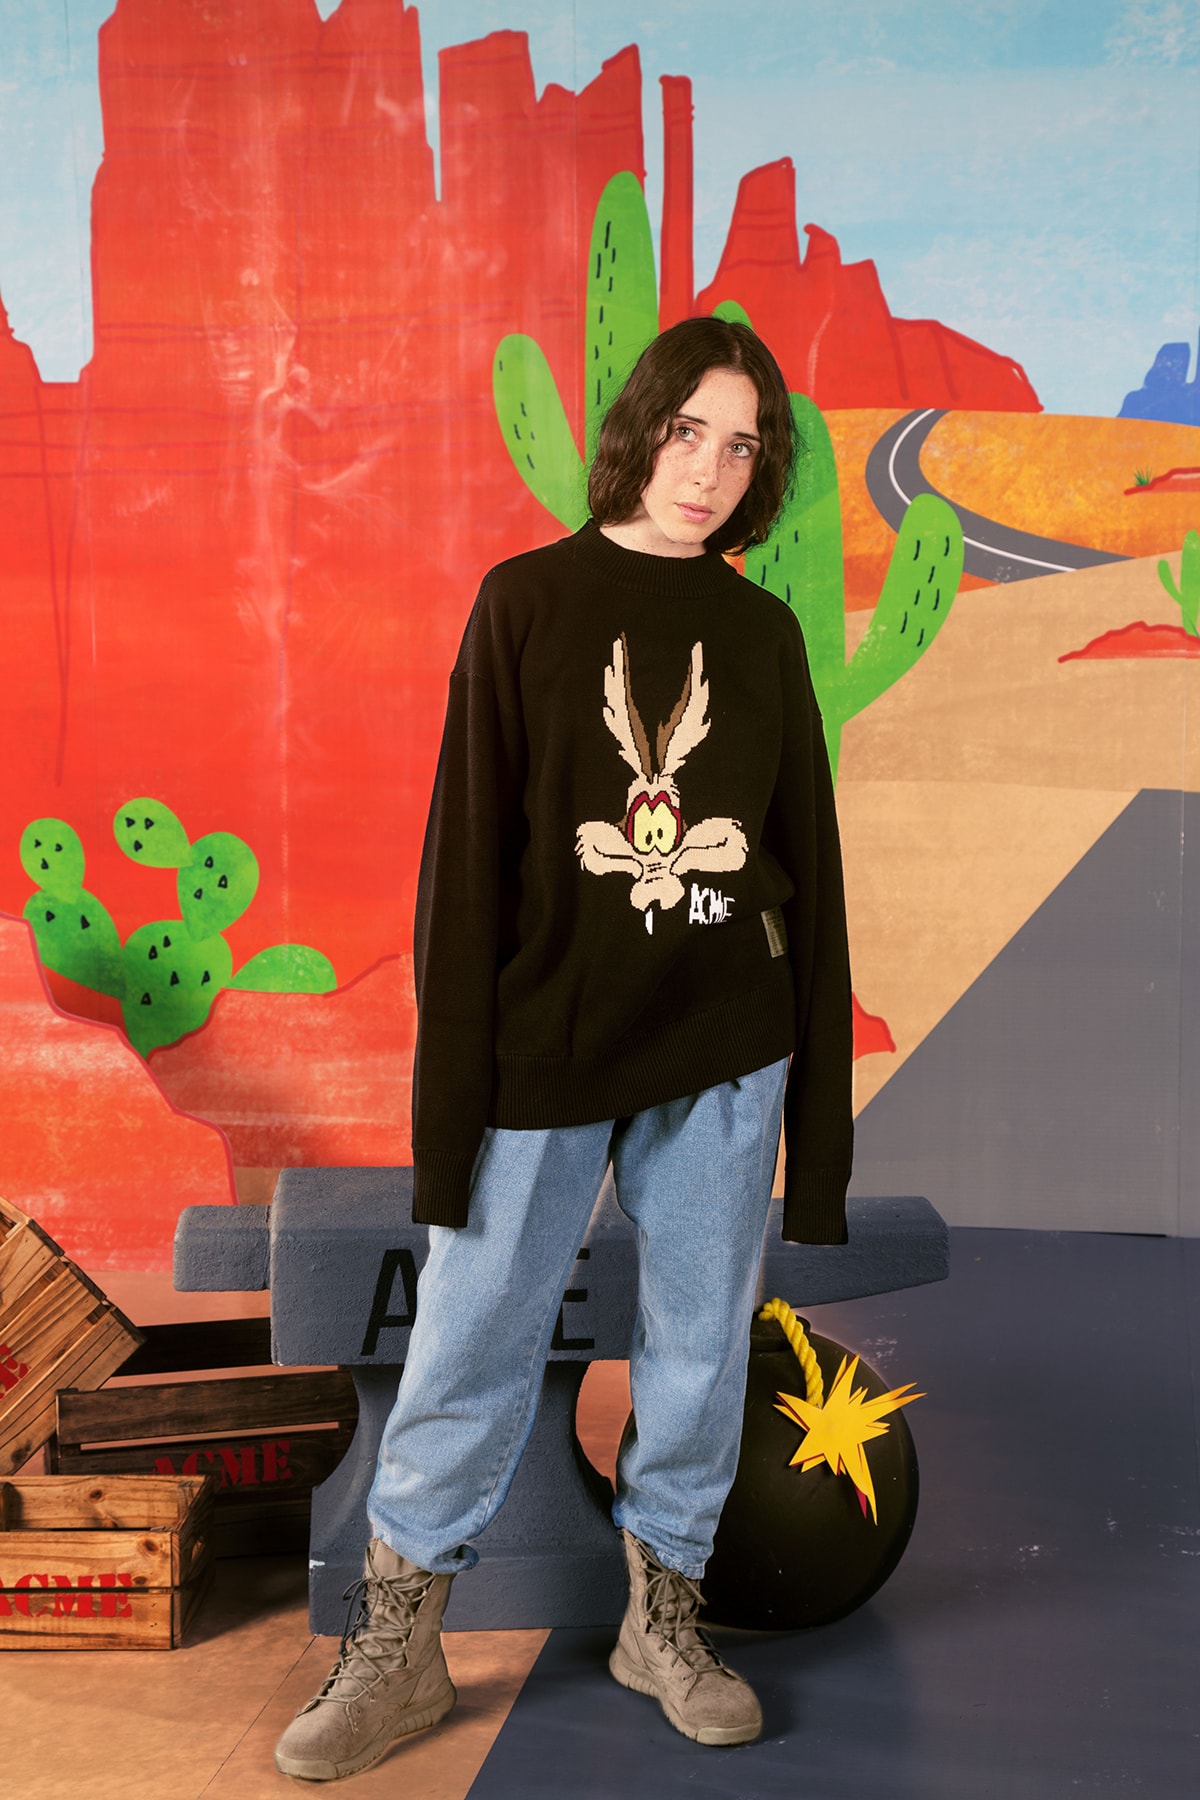 the hundreds looney tunes acme Wile E. Coyote Road Runner collaboration collection warner bros sweater military camouflage army m51 jacket print bomber